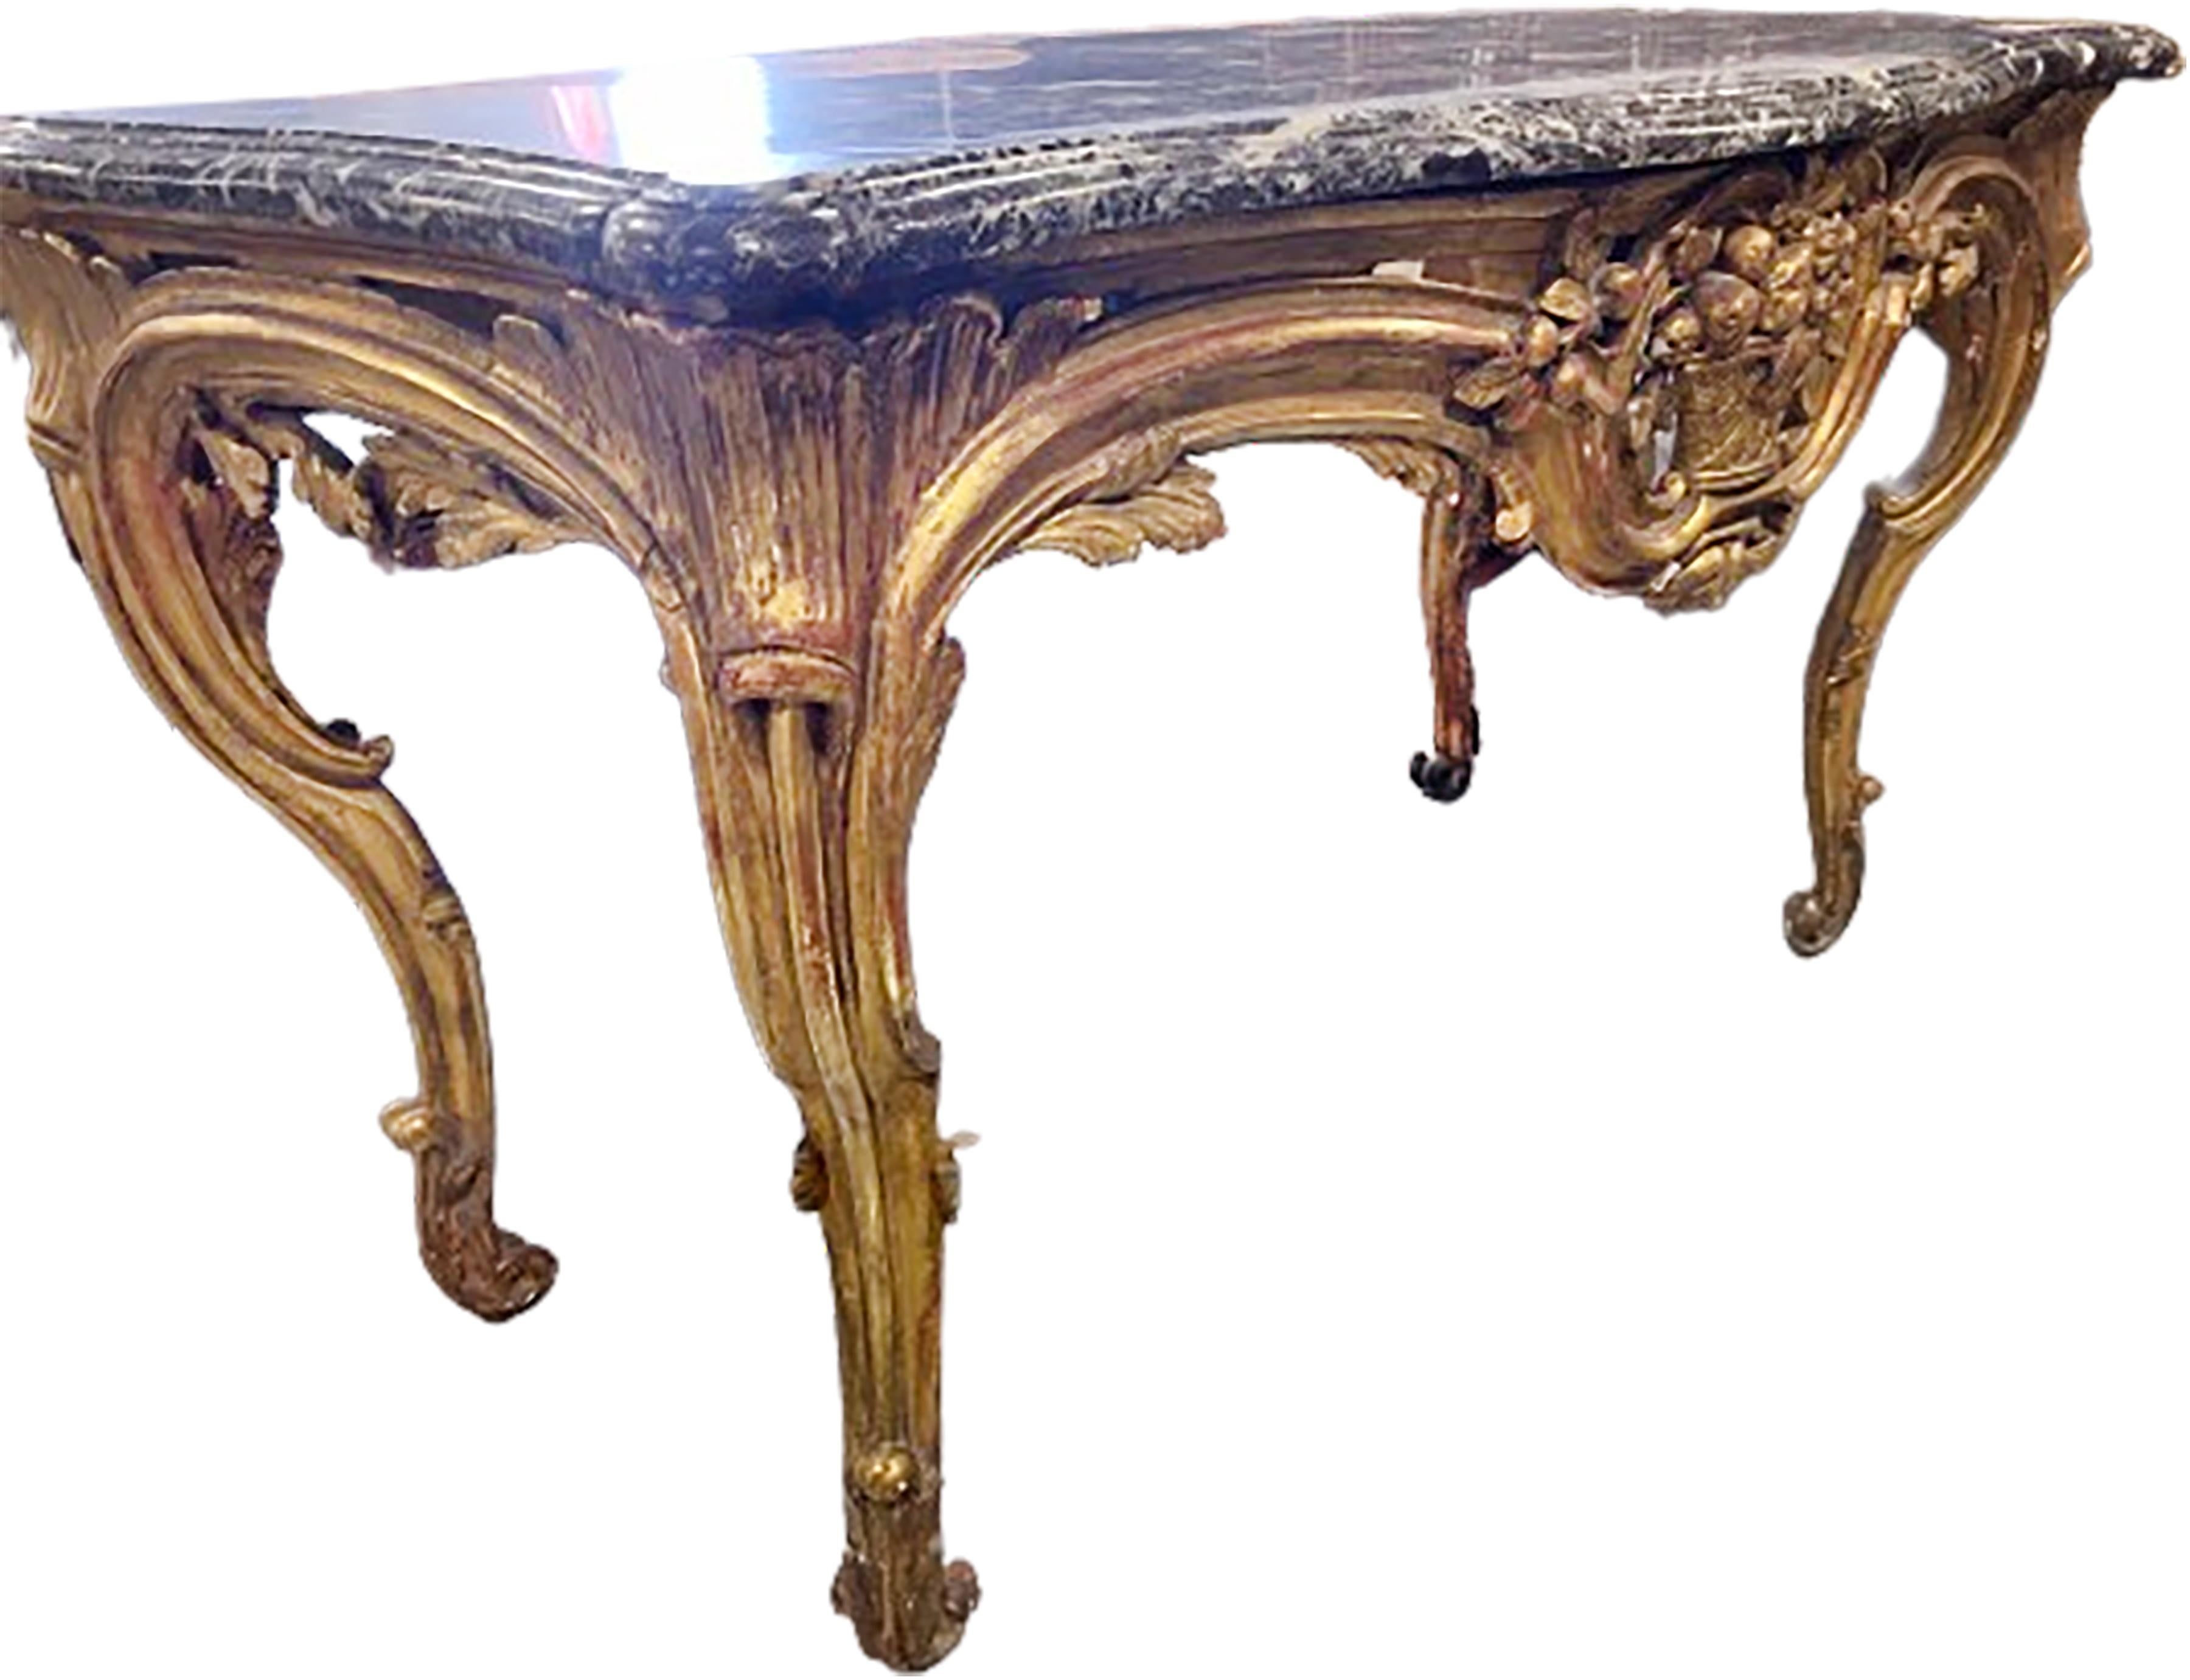 Regency 18th Century French Regence Giltwood Console with Marble Top For Sale